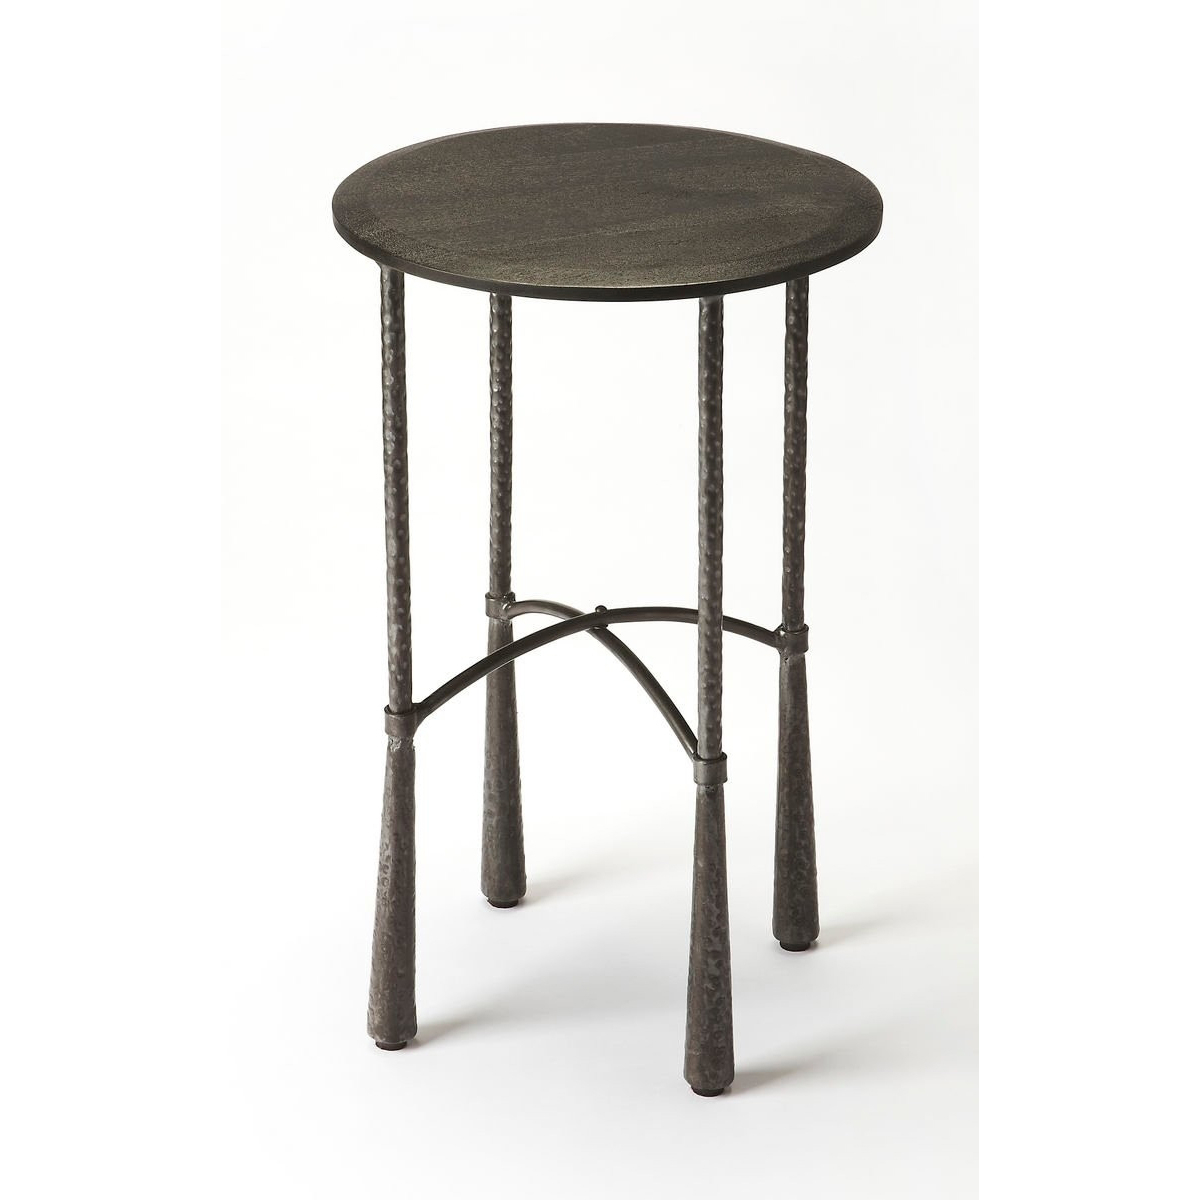 Butler Bastion Industrial Chic Accent Table